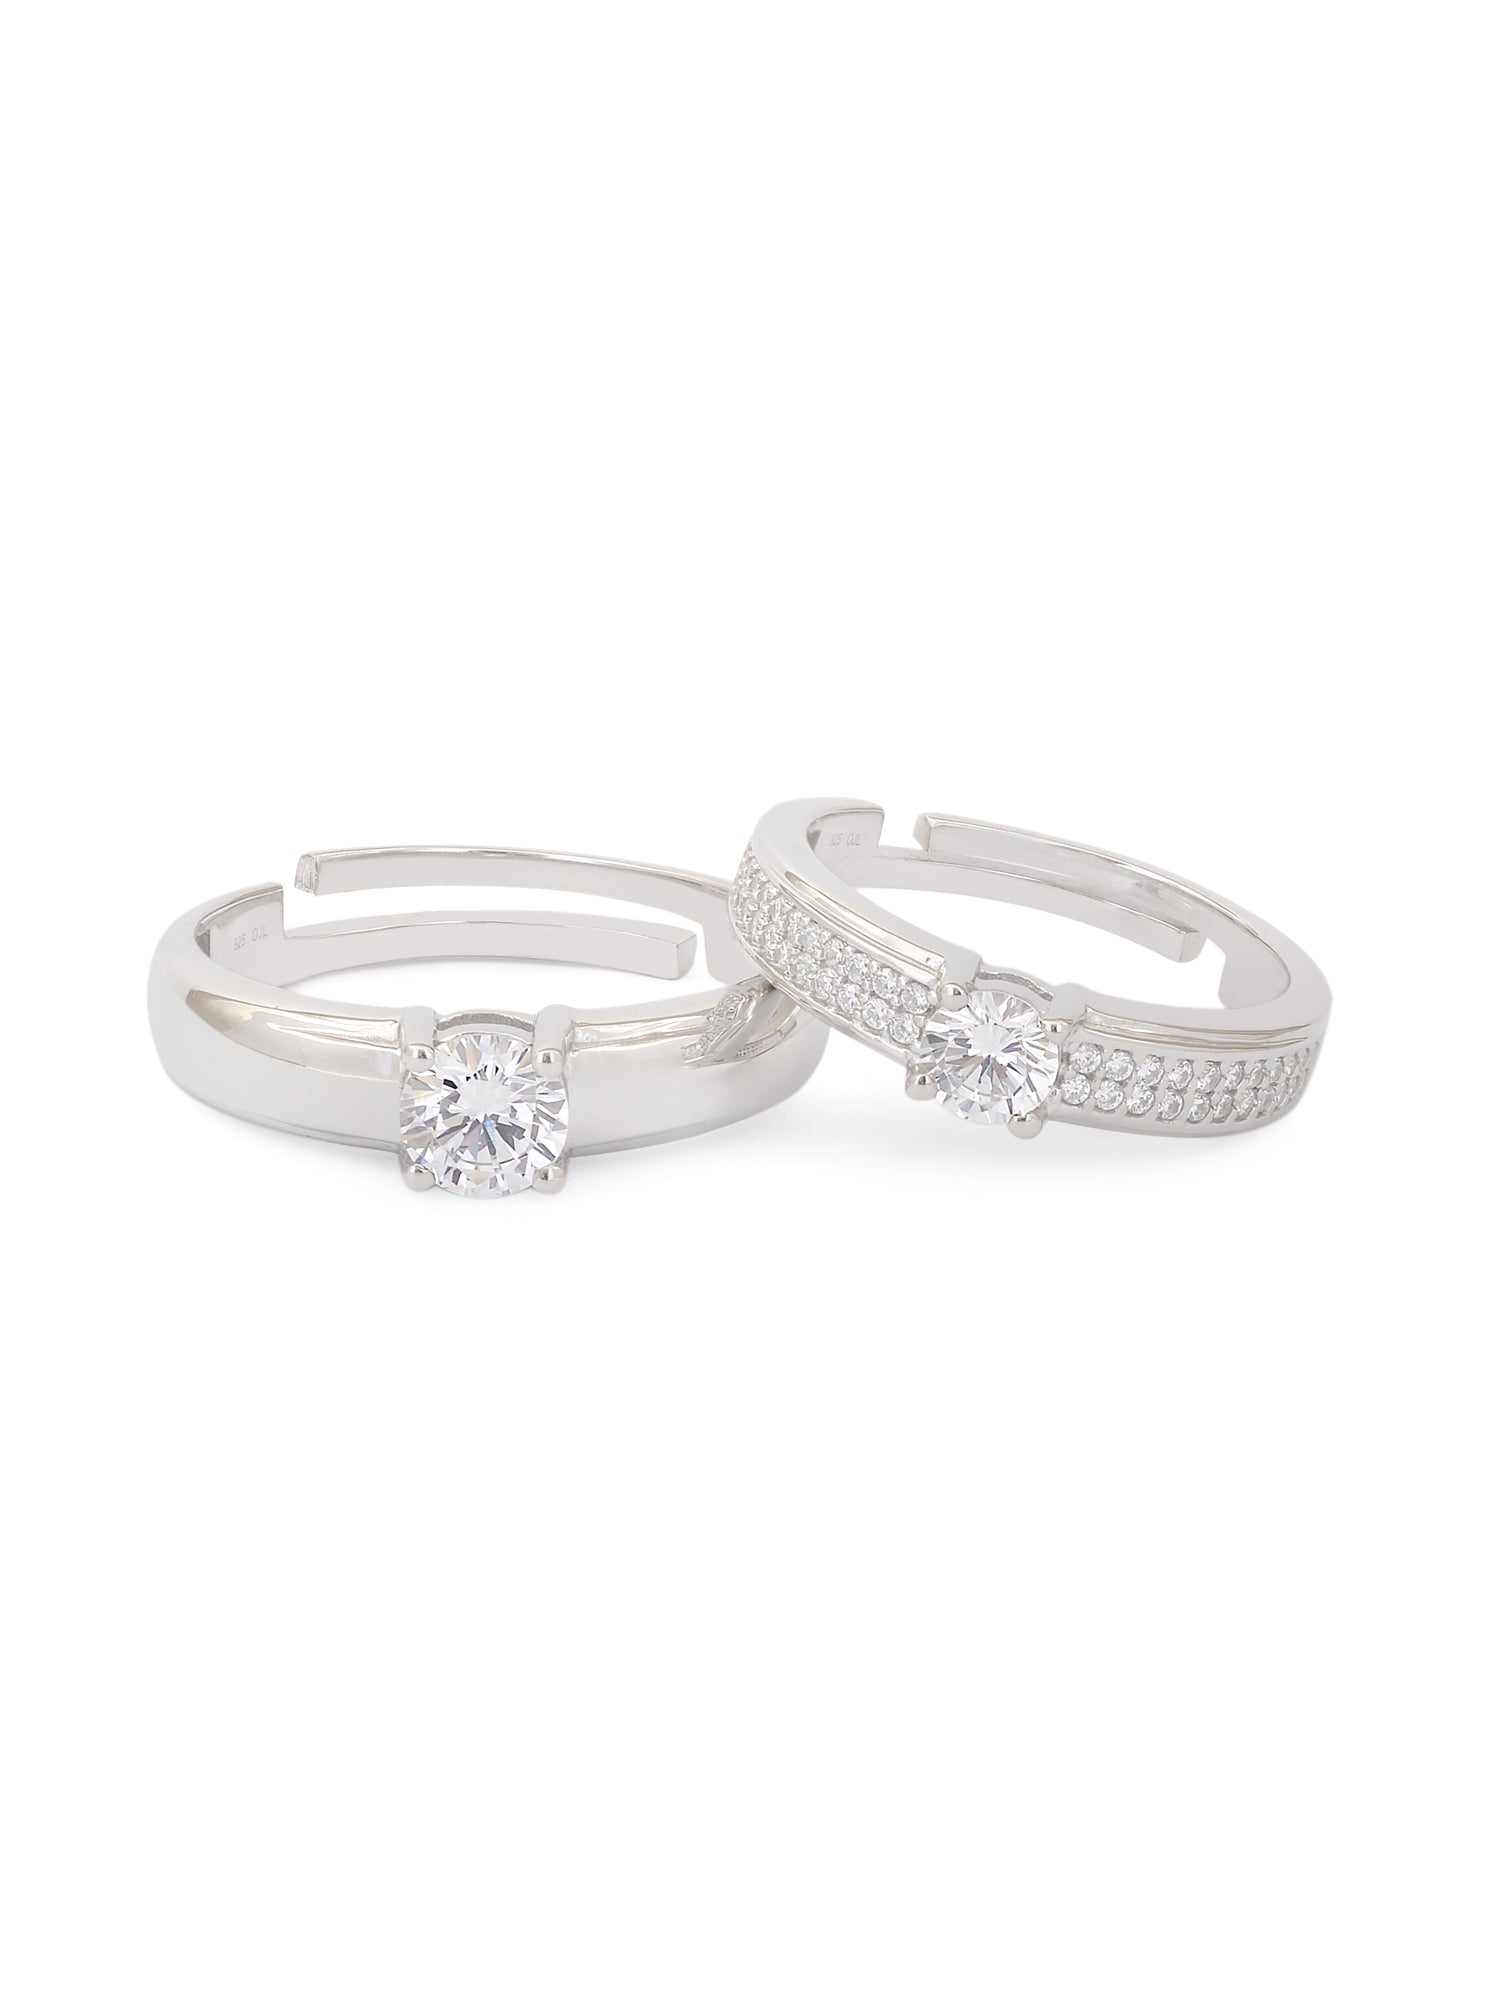 PROMISE COUPLE BAND RINGS-3